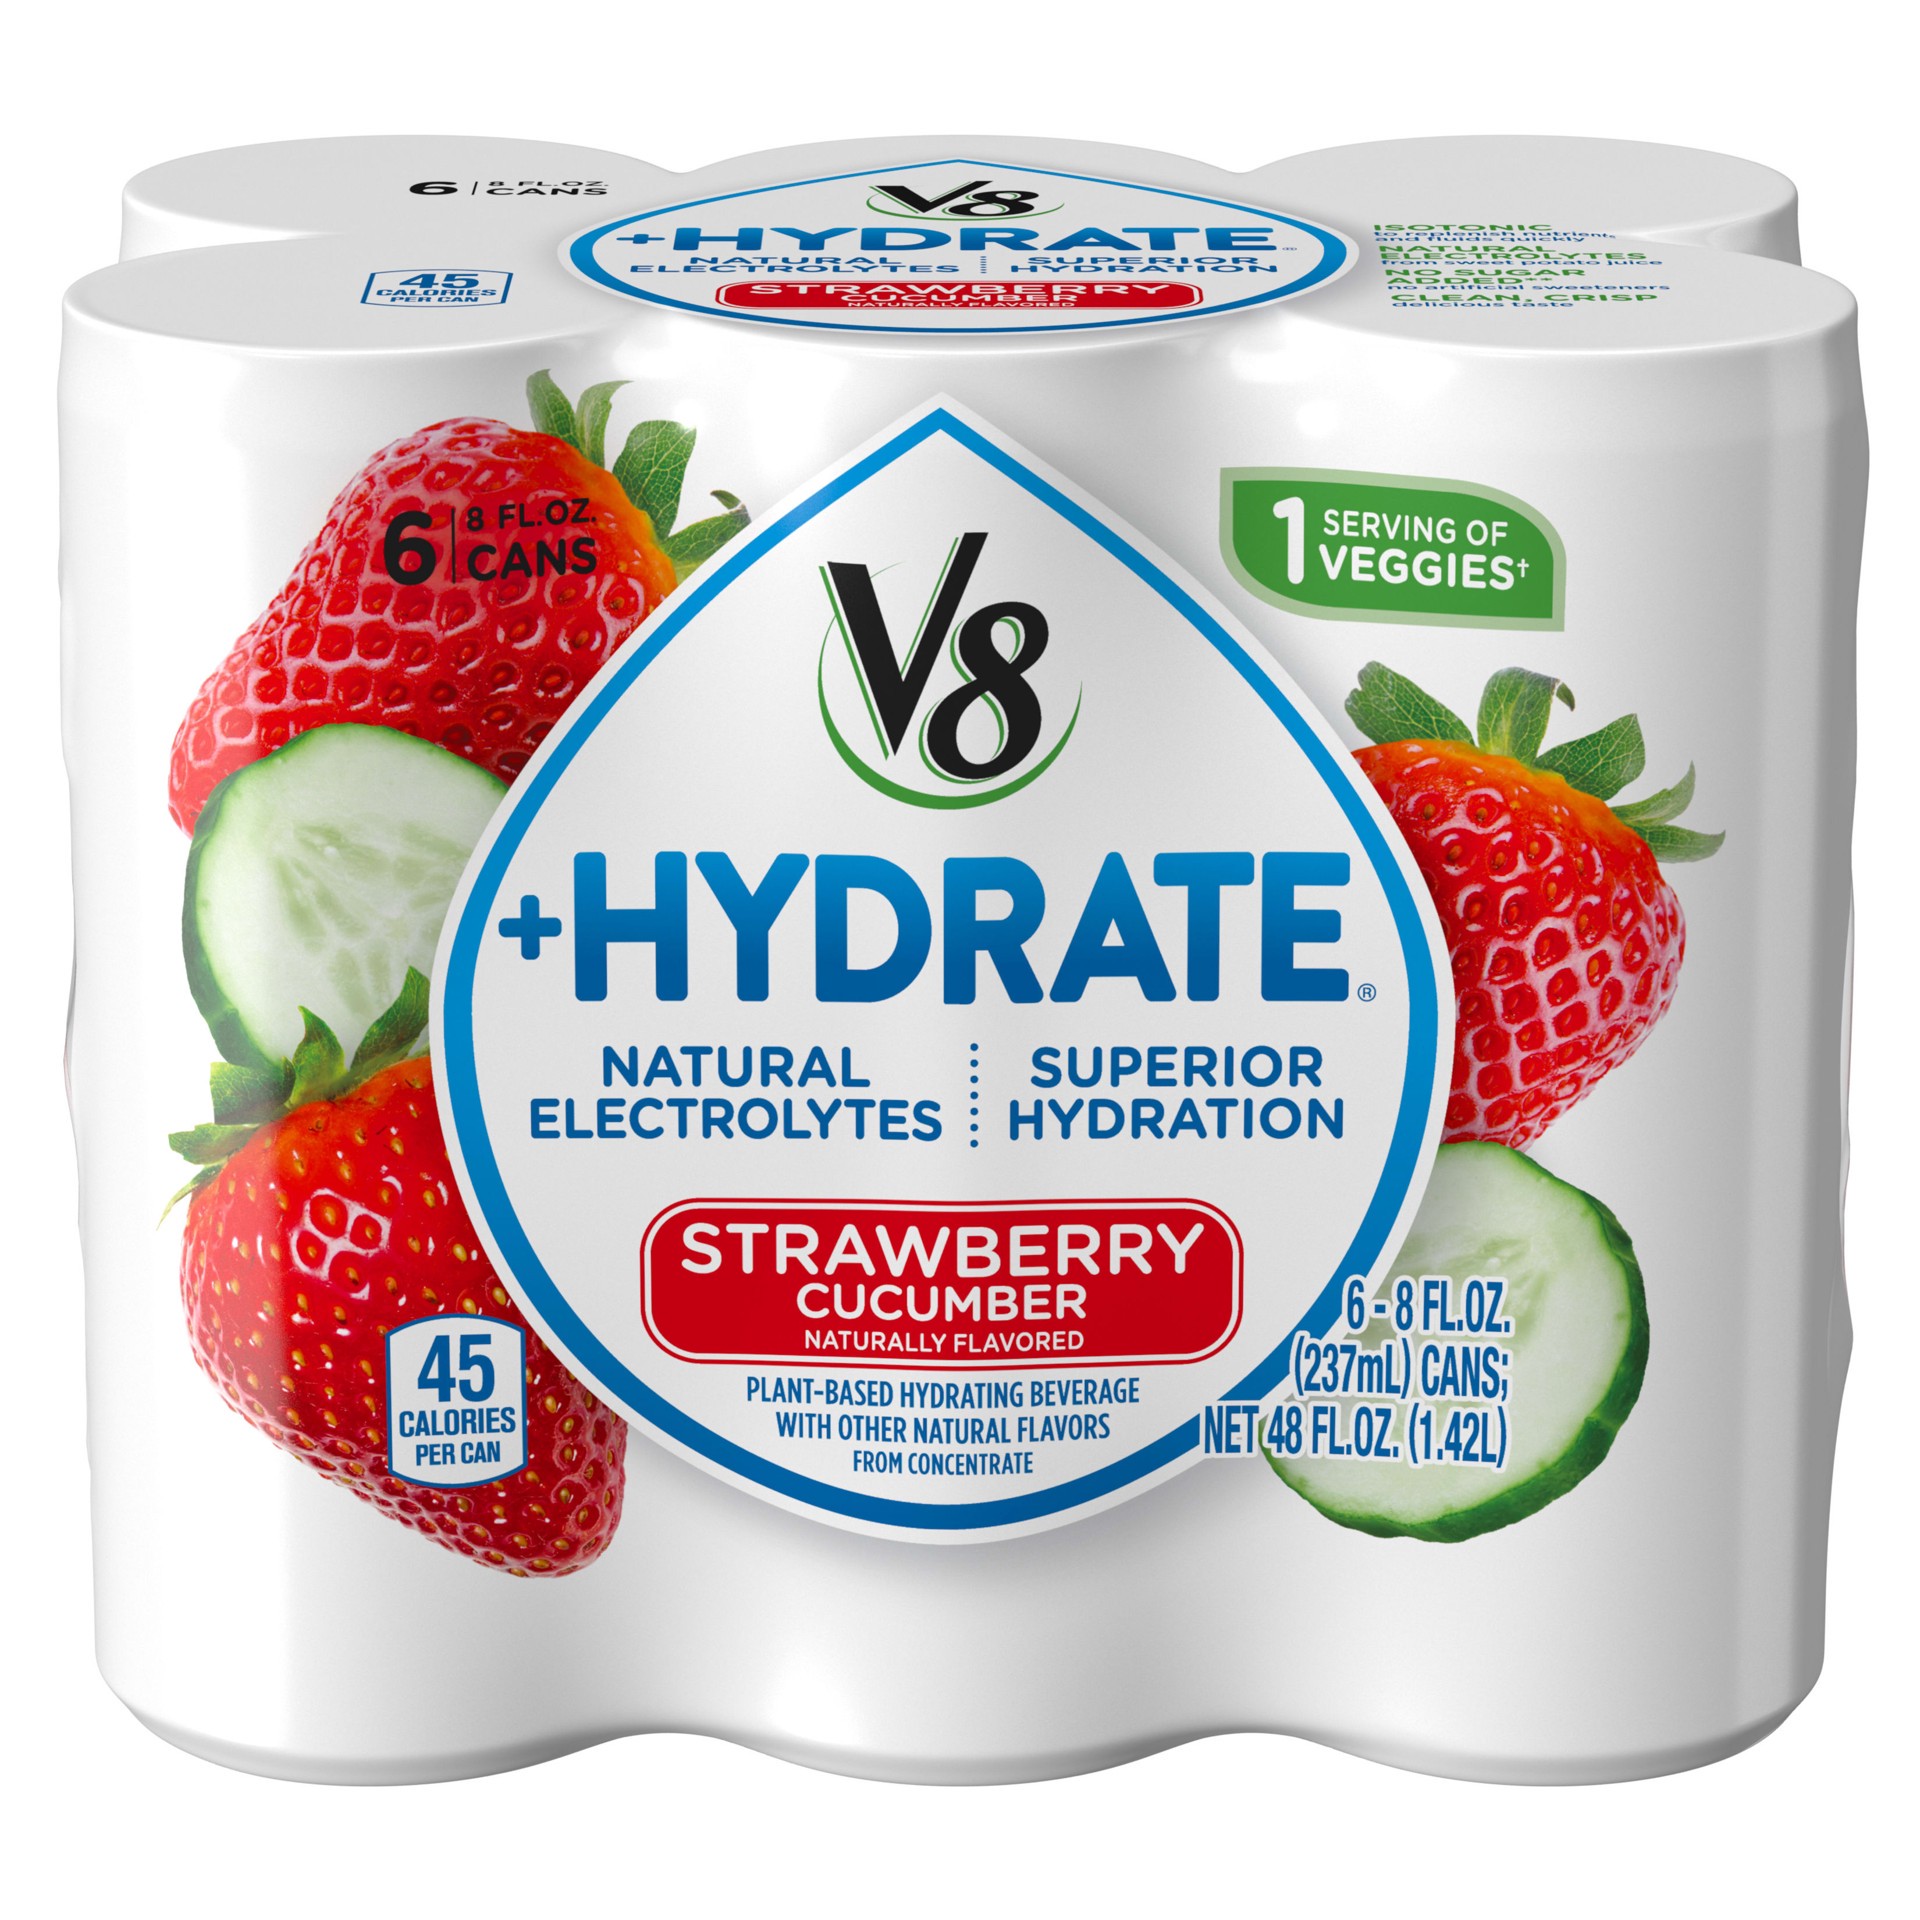 slide 1 of 9, V8 +Hydrate Plant-Based Hydrating Beverage, Strawberry Cucumber, 8 oz. Can (Pack of 6), 48 oz